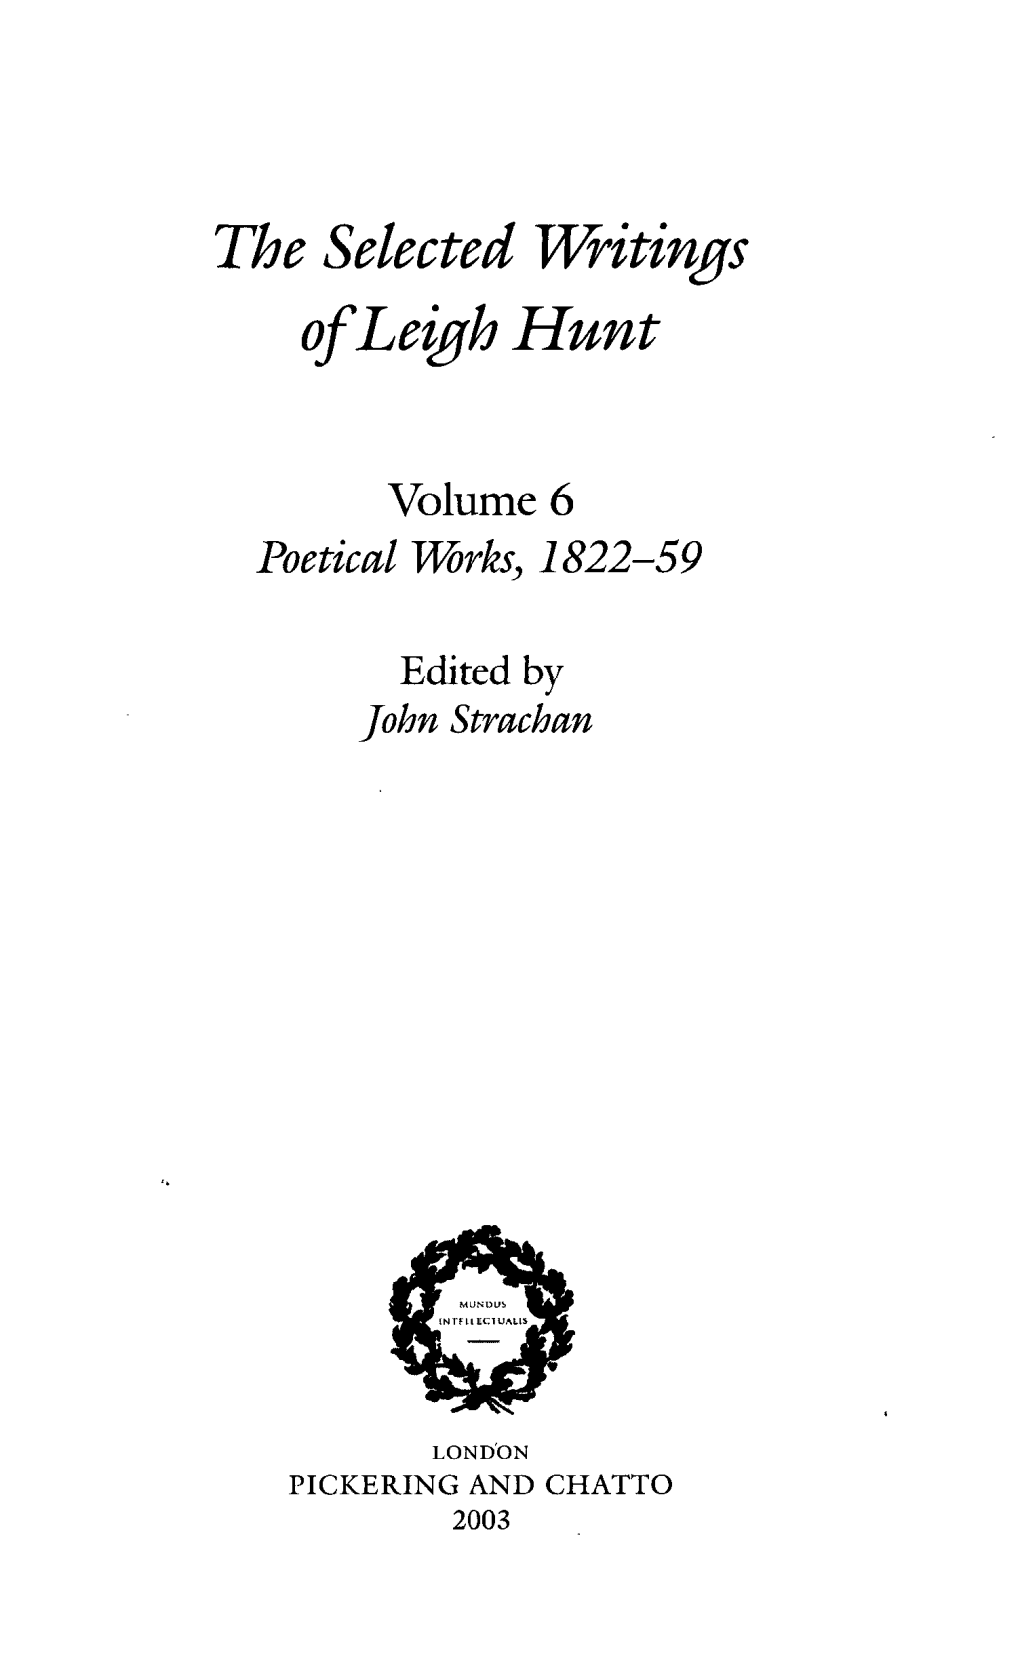 The Selected Writings of Leigh Hunt